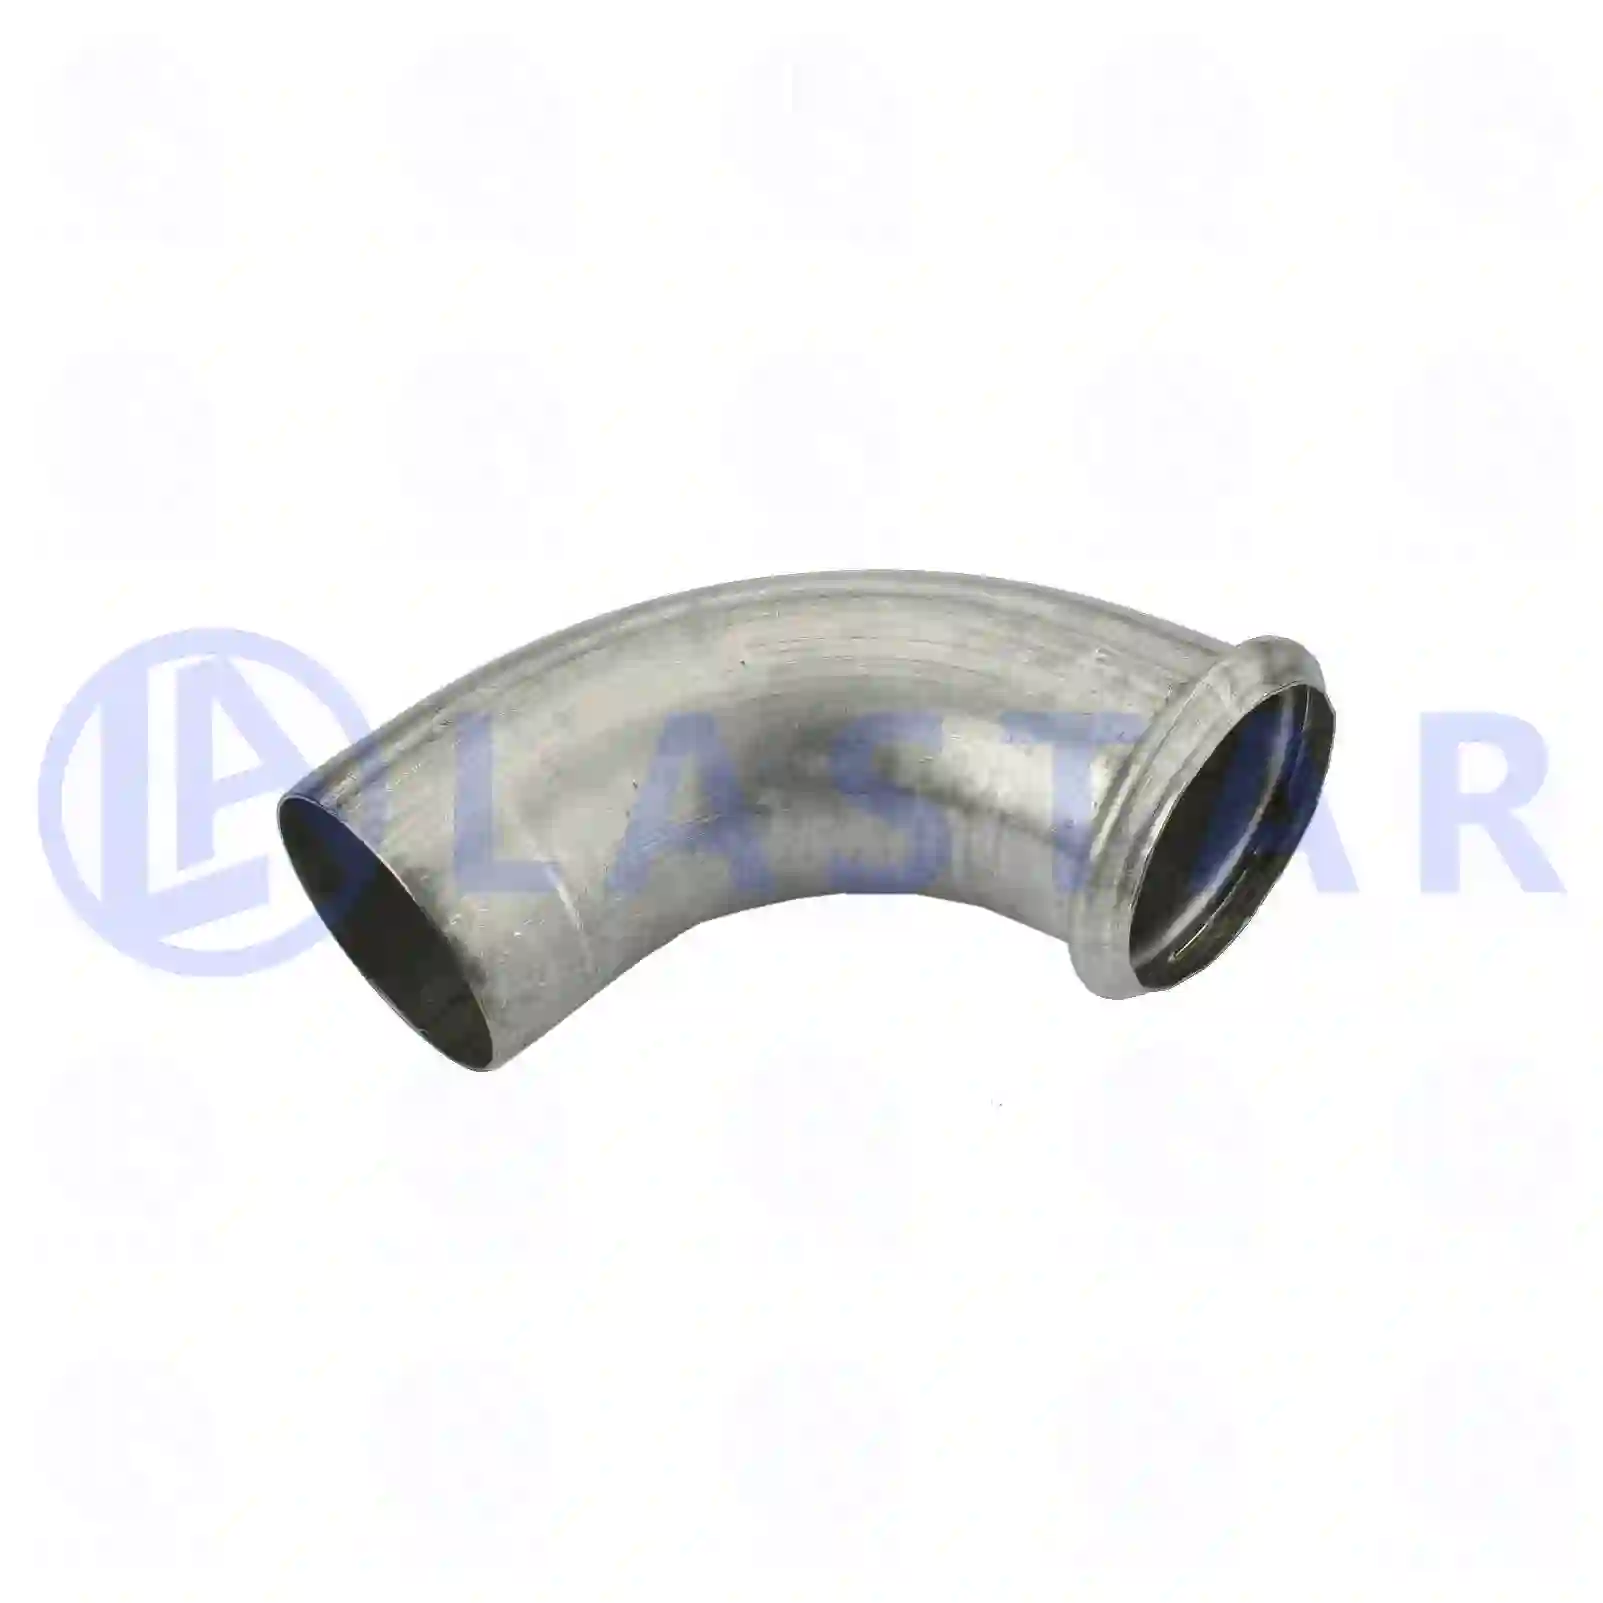 Exhaust pipe, 77706837, 1628883 ||  77706837 Lastar Spare Part | Truck Spare Parts, Auotomotive Spare Parts Exhaust pipe, 77706837, 1628883 ||  77706837 Lastar Spare Part | Truck Spare Parts, Auotomotive Spare Parts